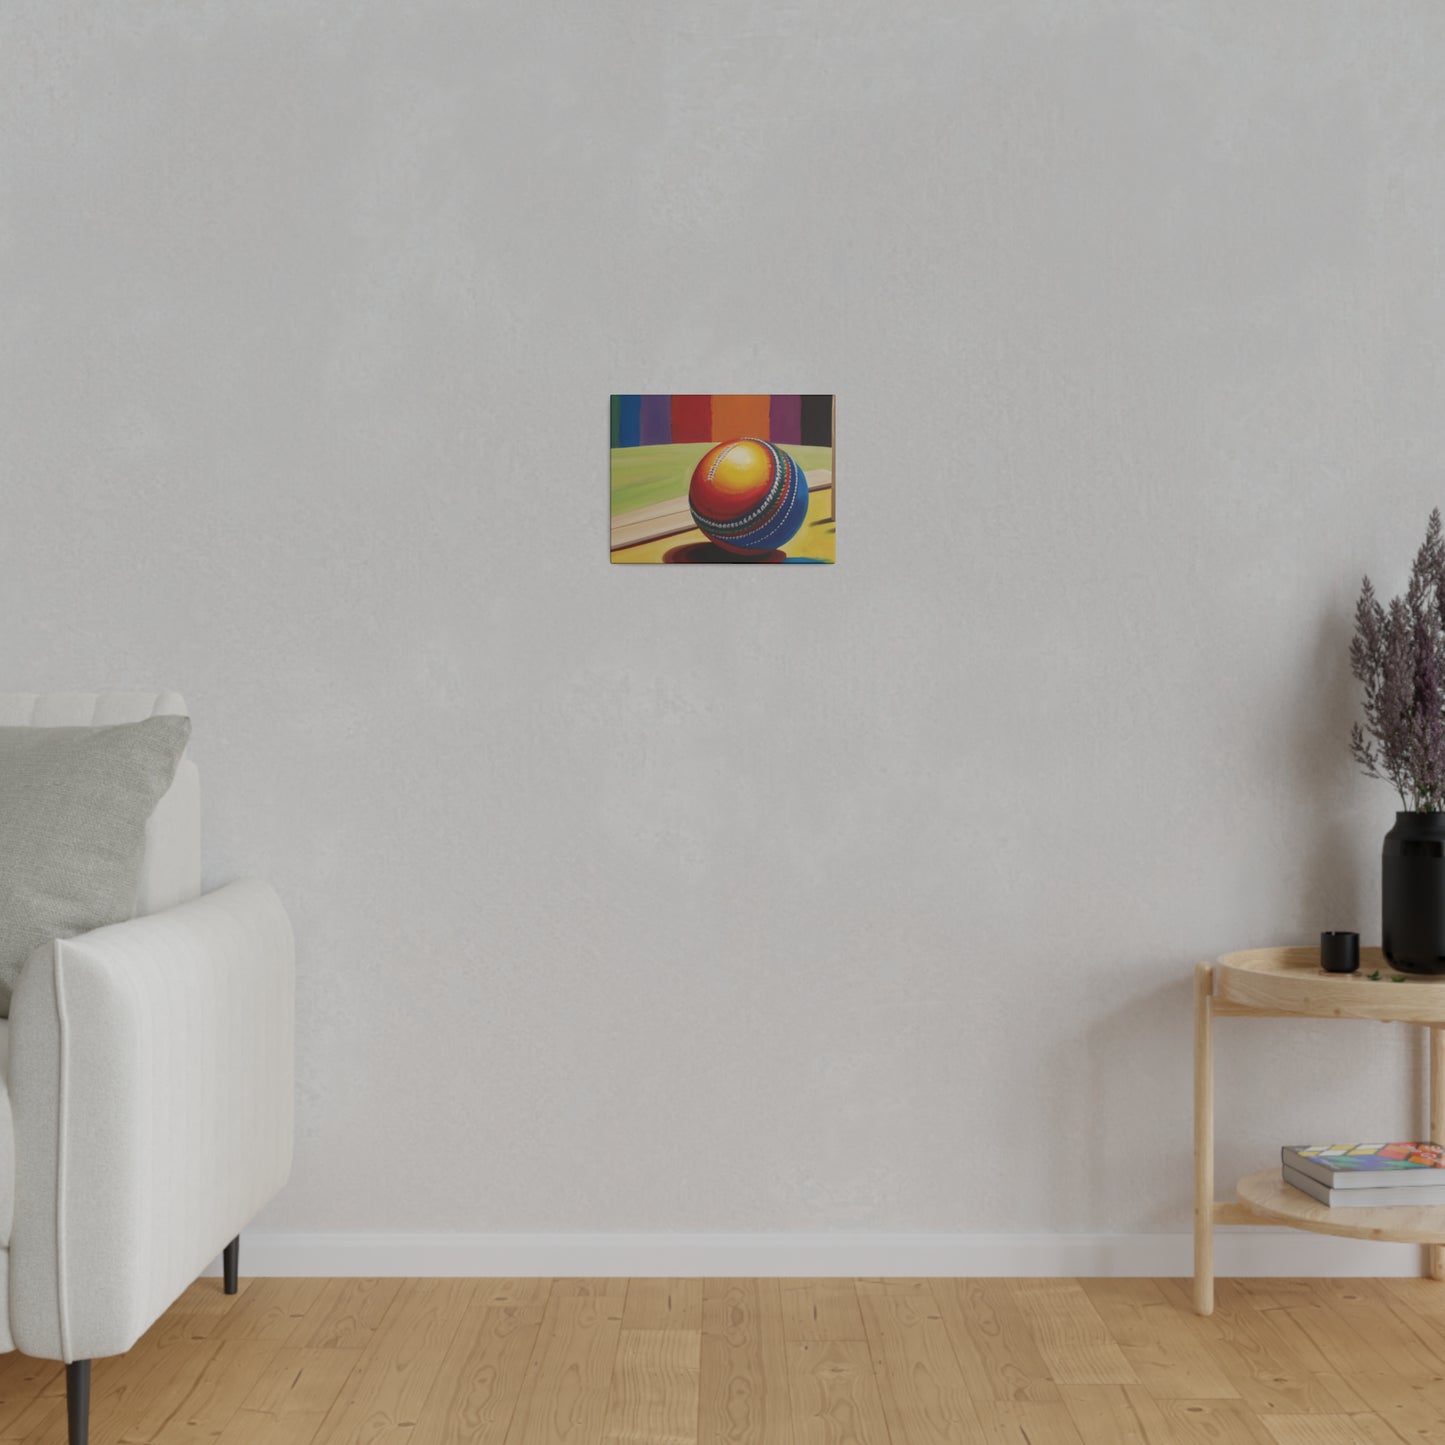 Colourful Cricket Ball Canvas - Matte Canvas, Stretched, 0.75"